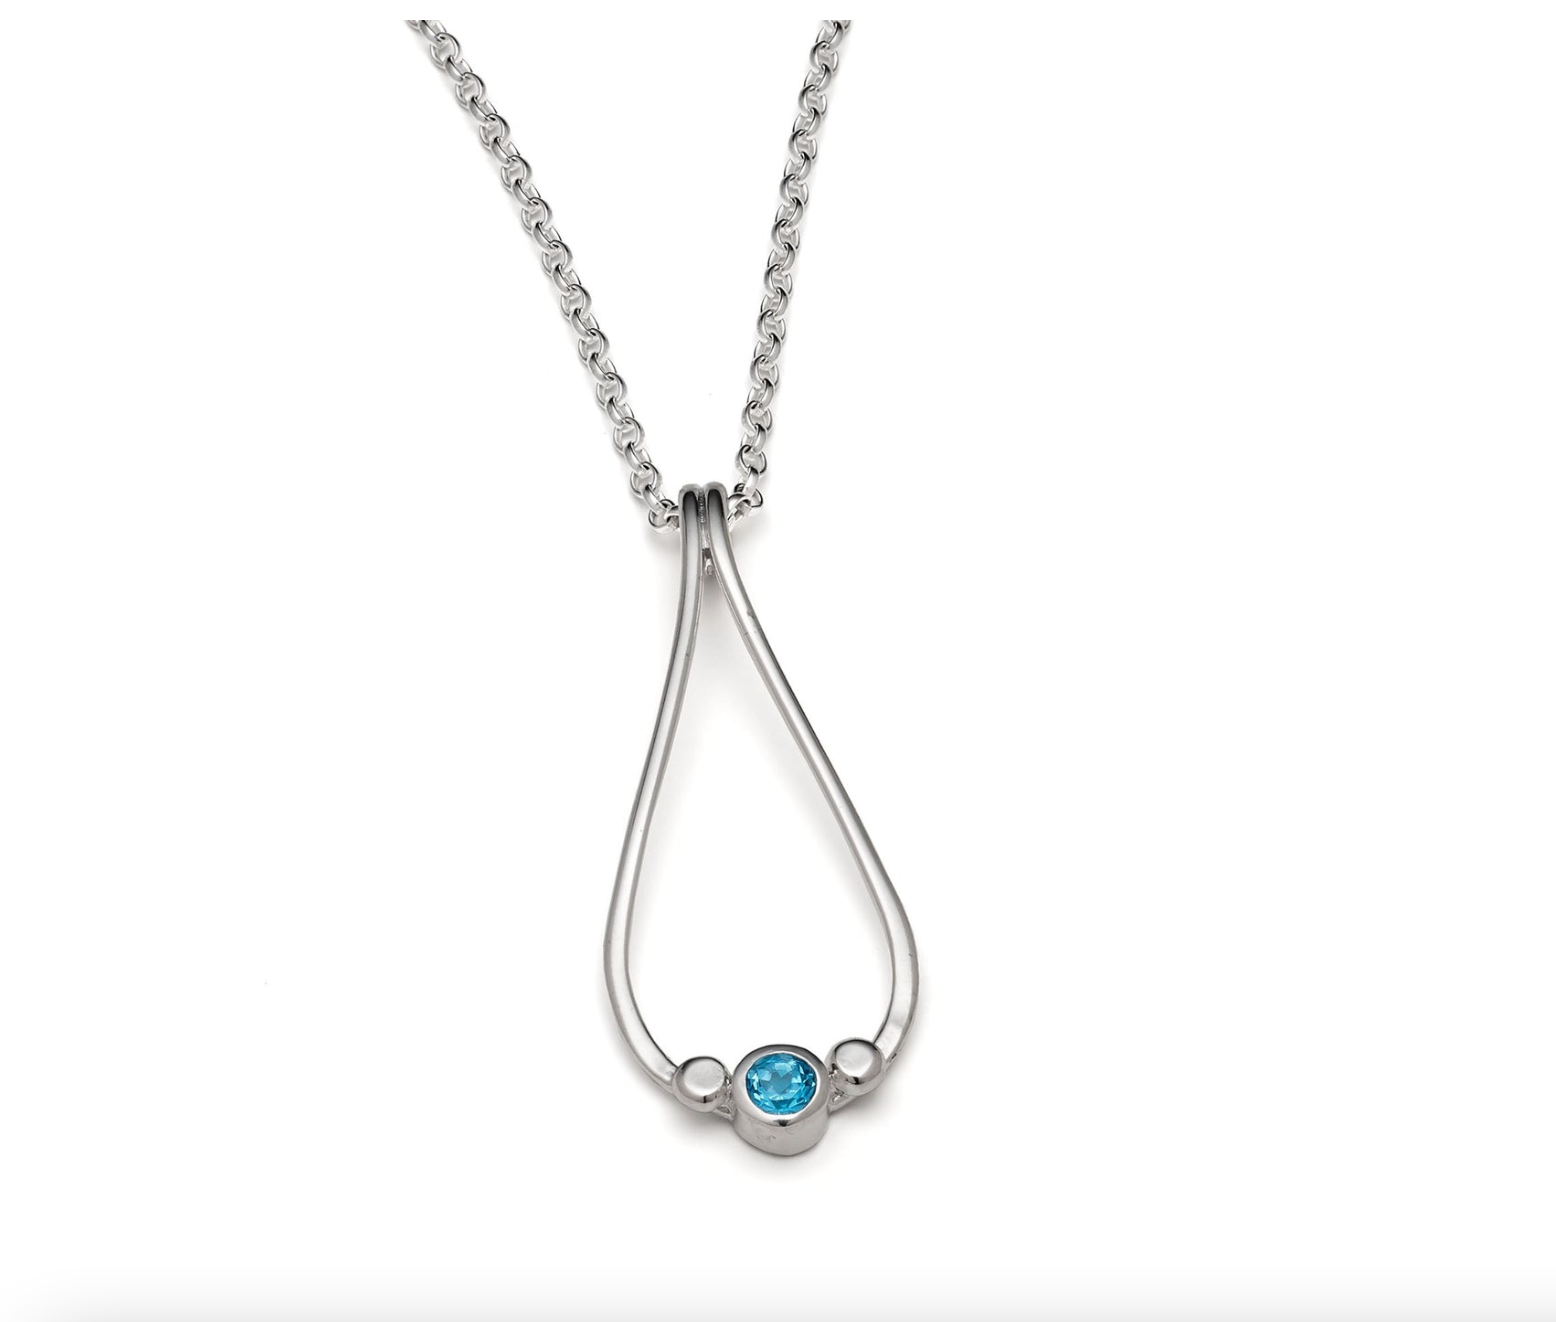 Silver Pebble Twist Pendant Necklace With Swiss Blue Topaz